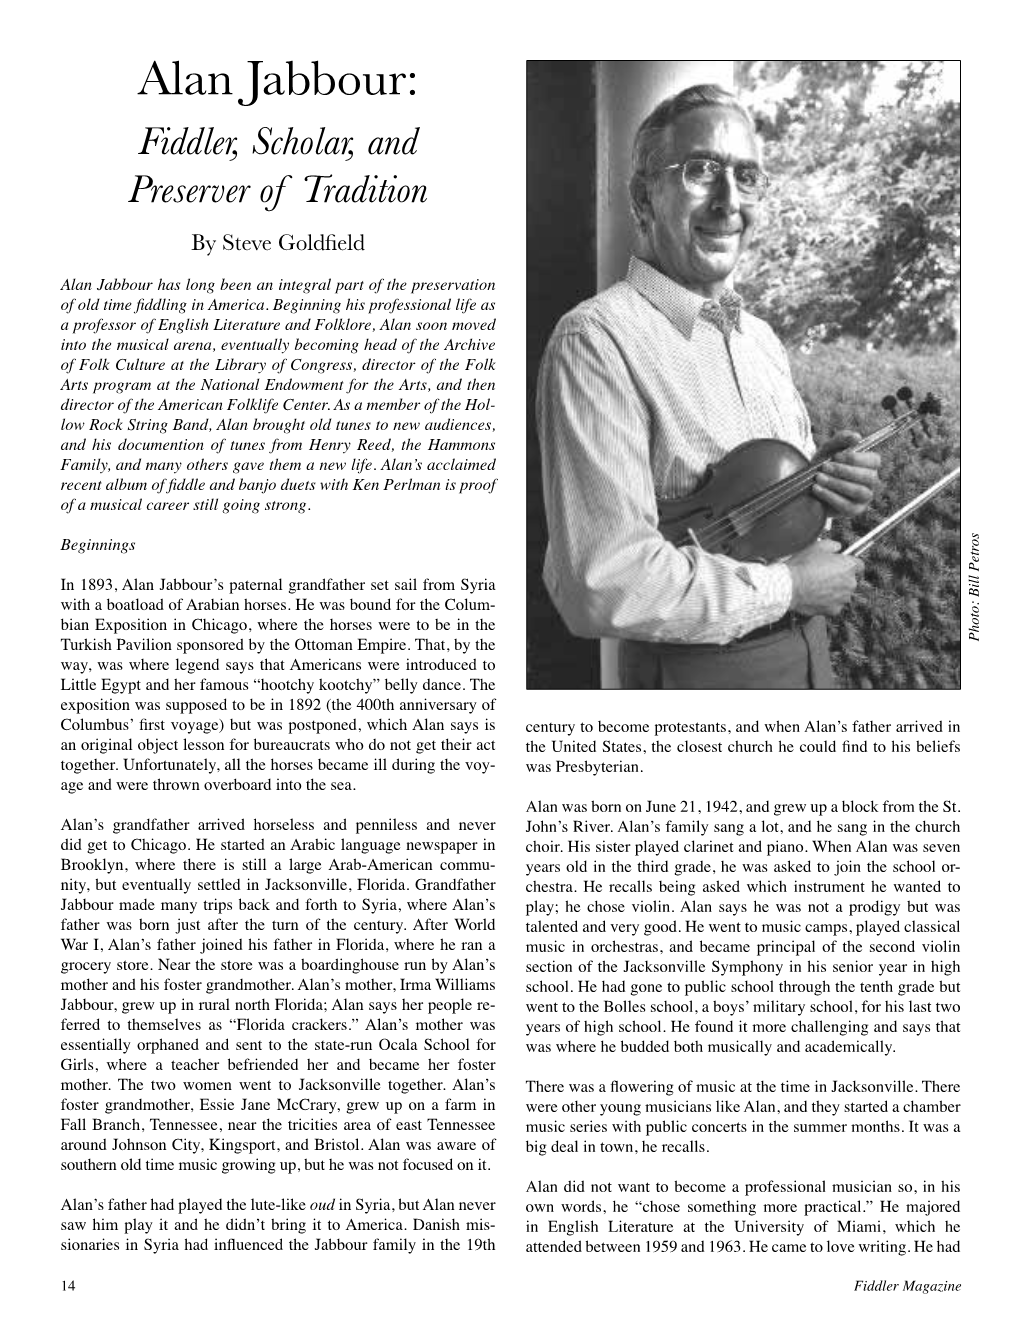 Alan Jabbour: Fiddler, Scholar, and Preserver of Tradition by Steve Goldfield